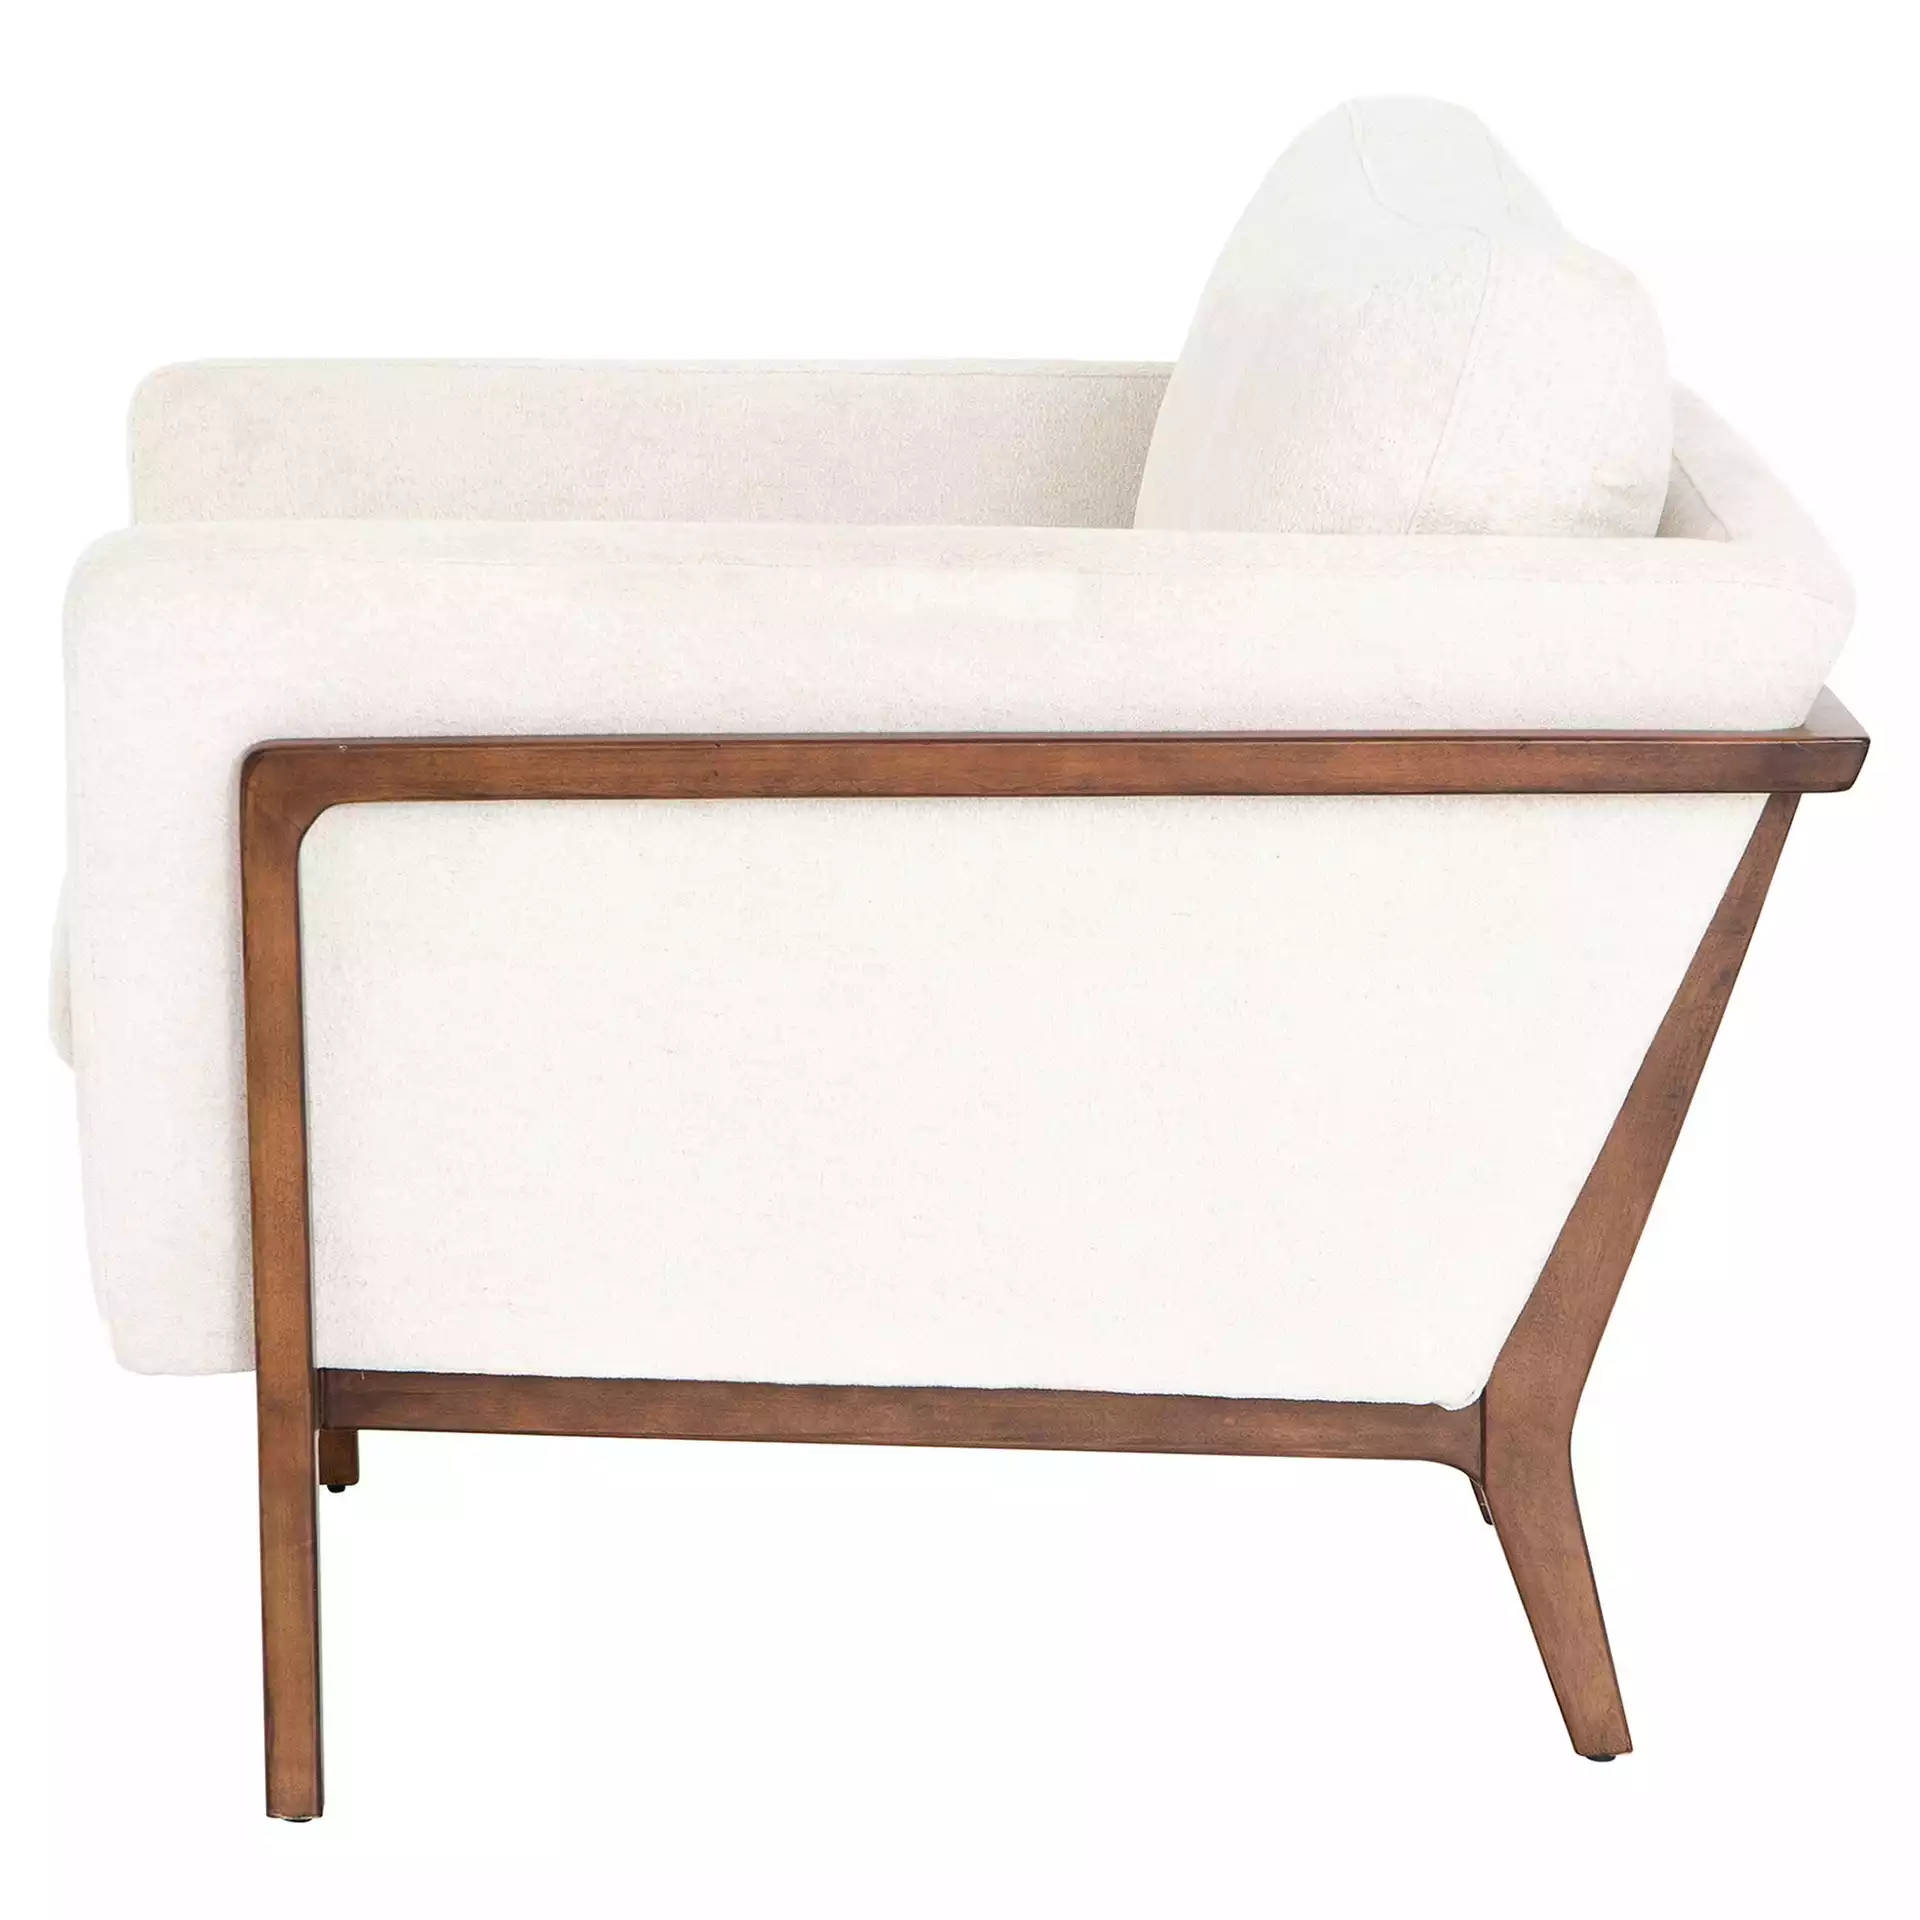 Dorothy Modern Classic Upholstered Birch Wood Occasional Arm Chair, Ivory